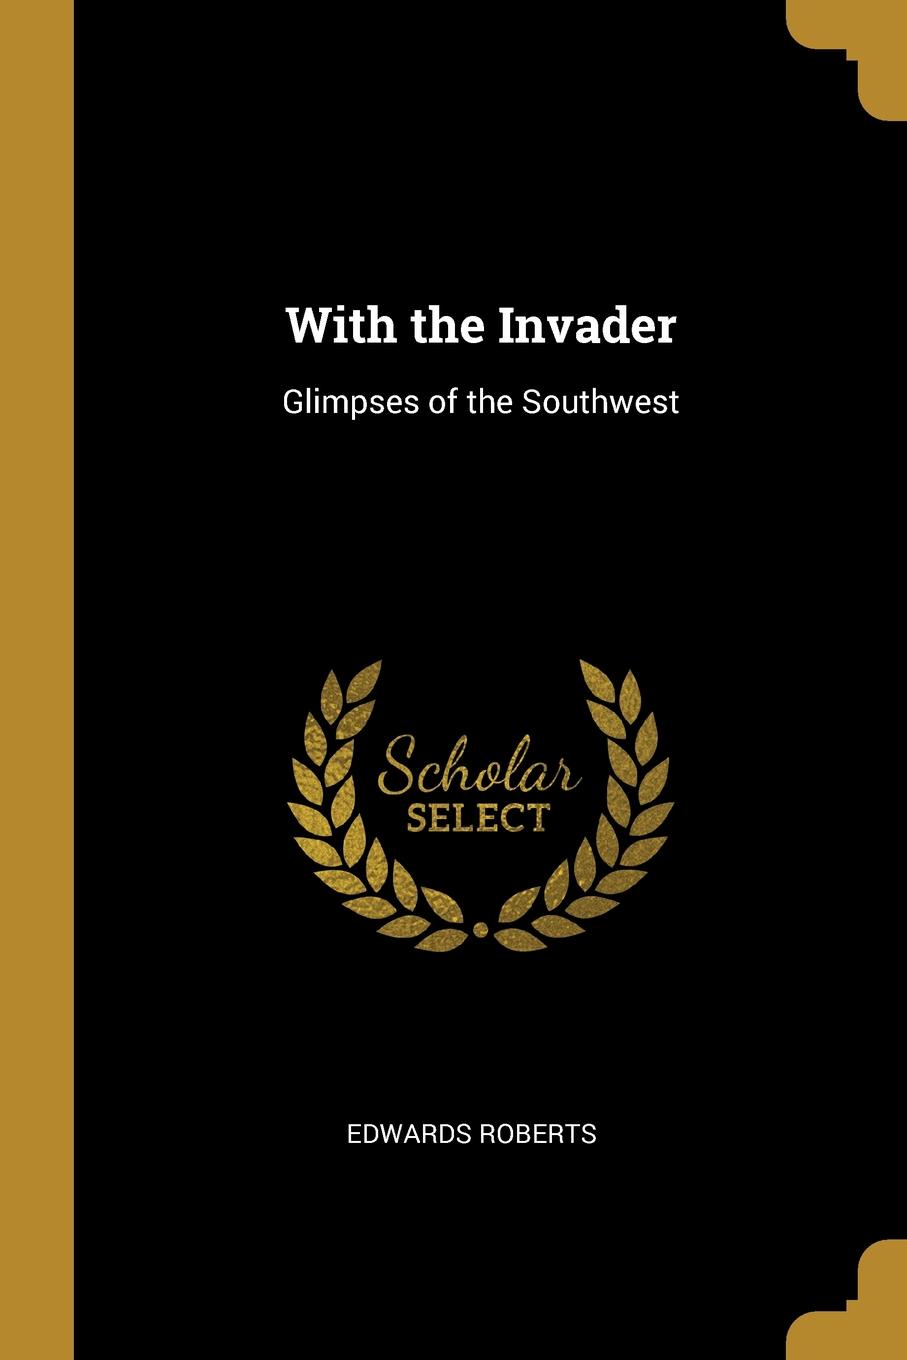 With the Invader. Glimpses of the Southwest